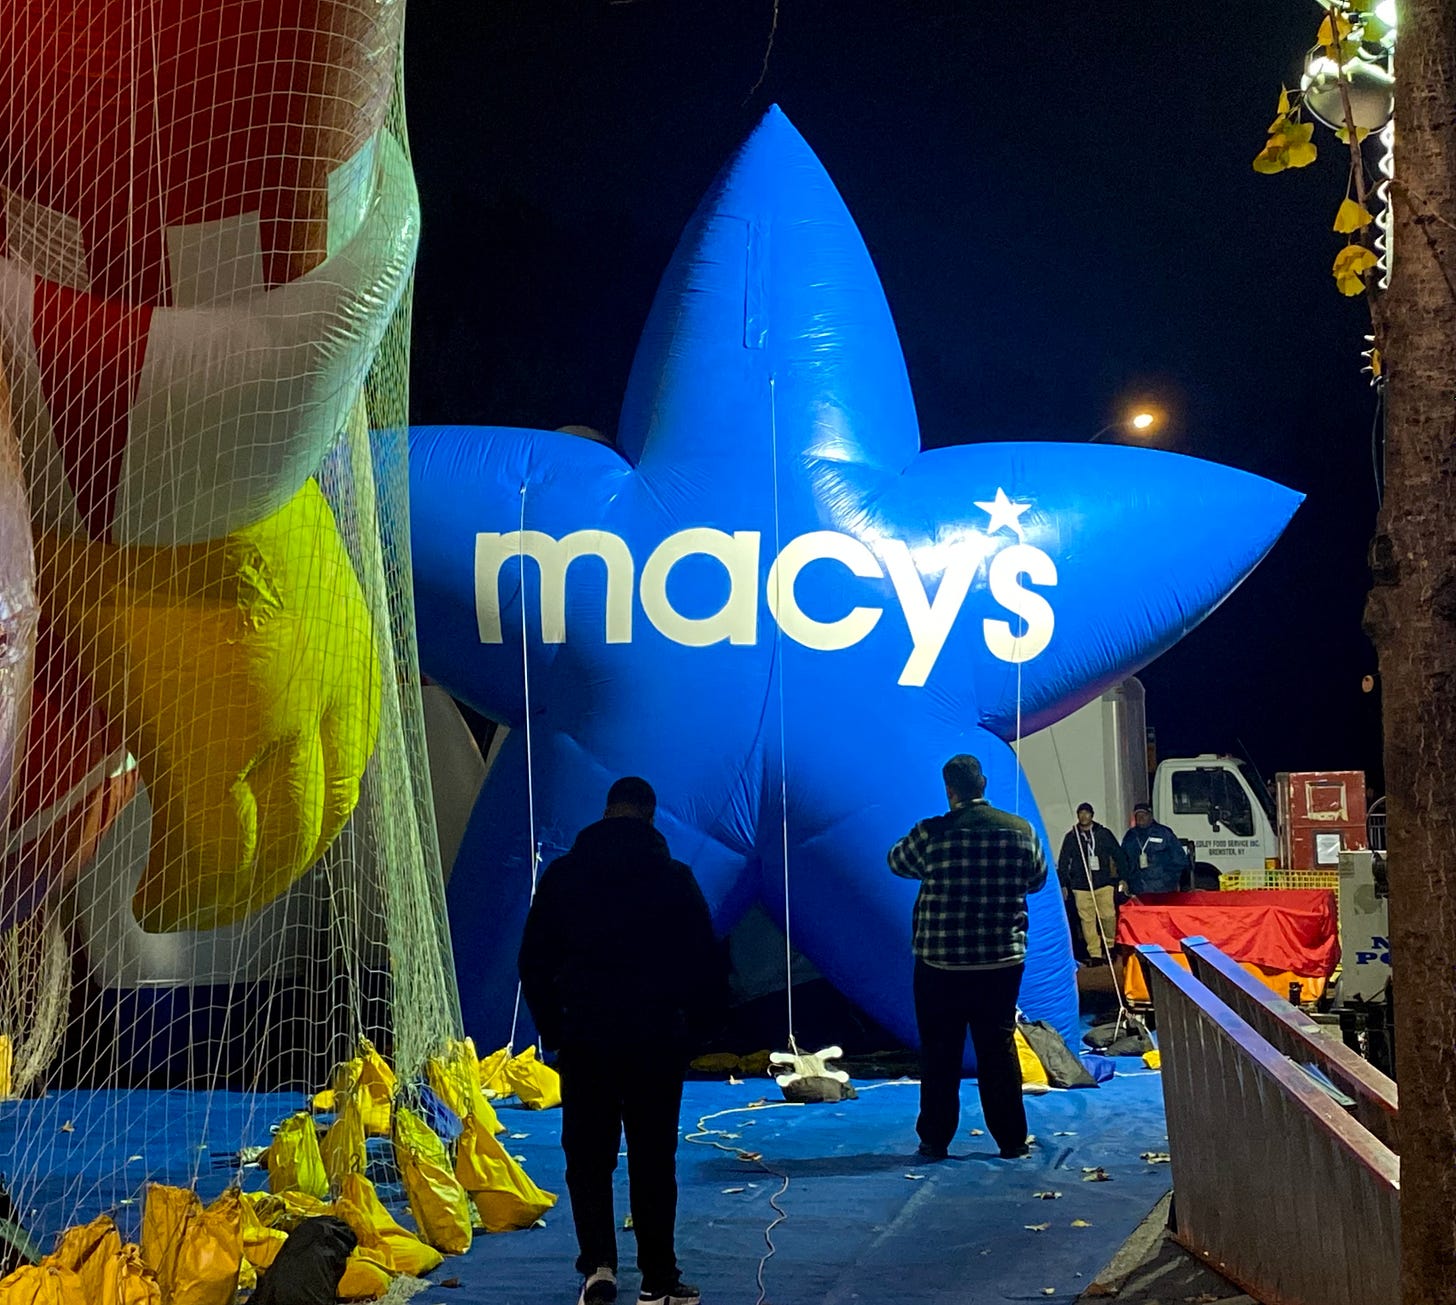 A blue star parade ballon with Macy's written on it in white letters, sandbagged next to a Ronald McDonald balloon tied down in netting. Two men are in front of it, working.